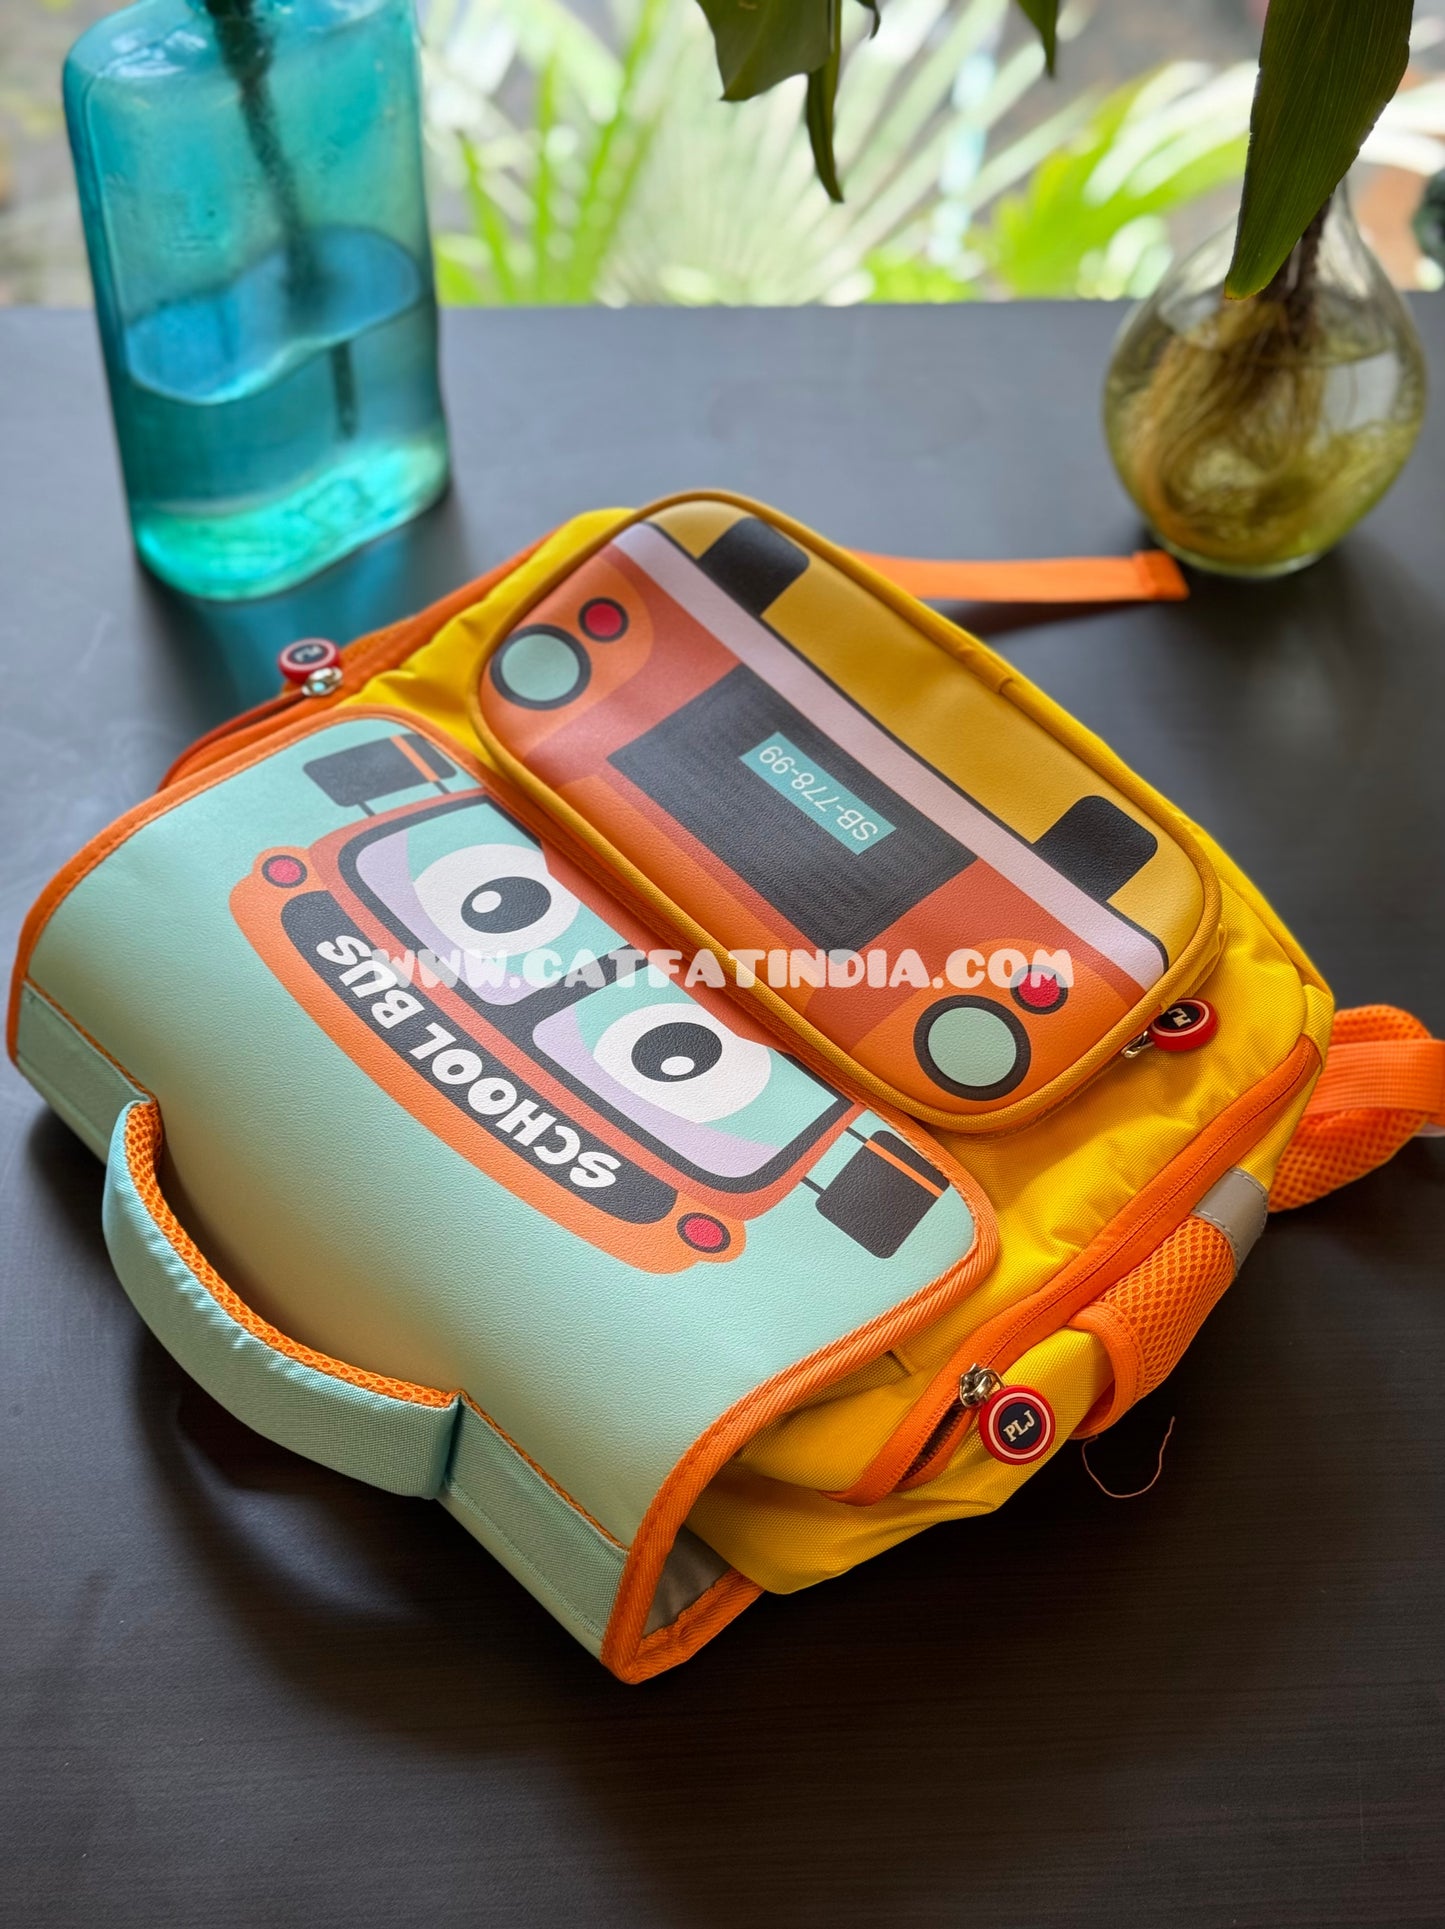 School Bus Backpack + (Free Burger Snack Box with ₹400)